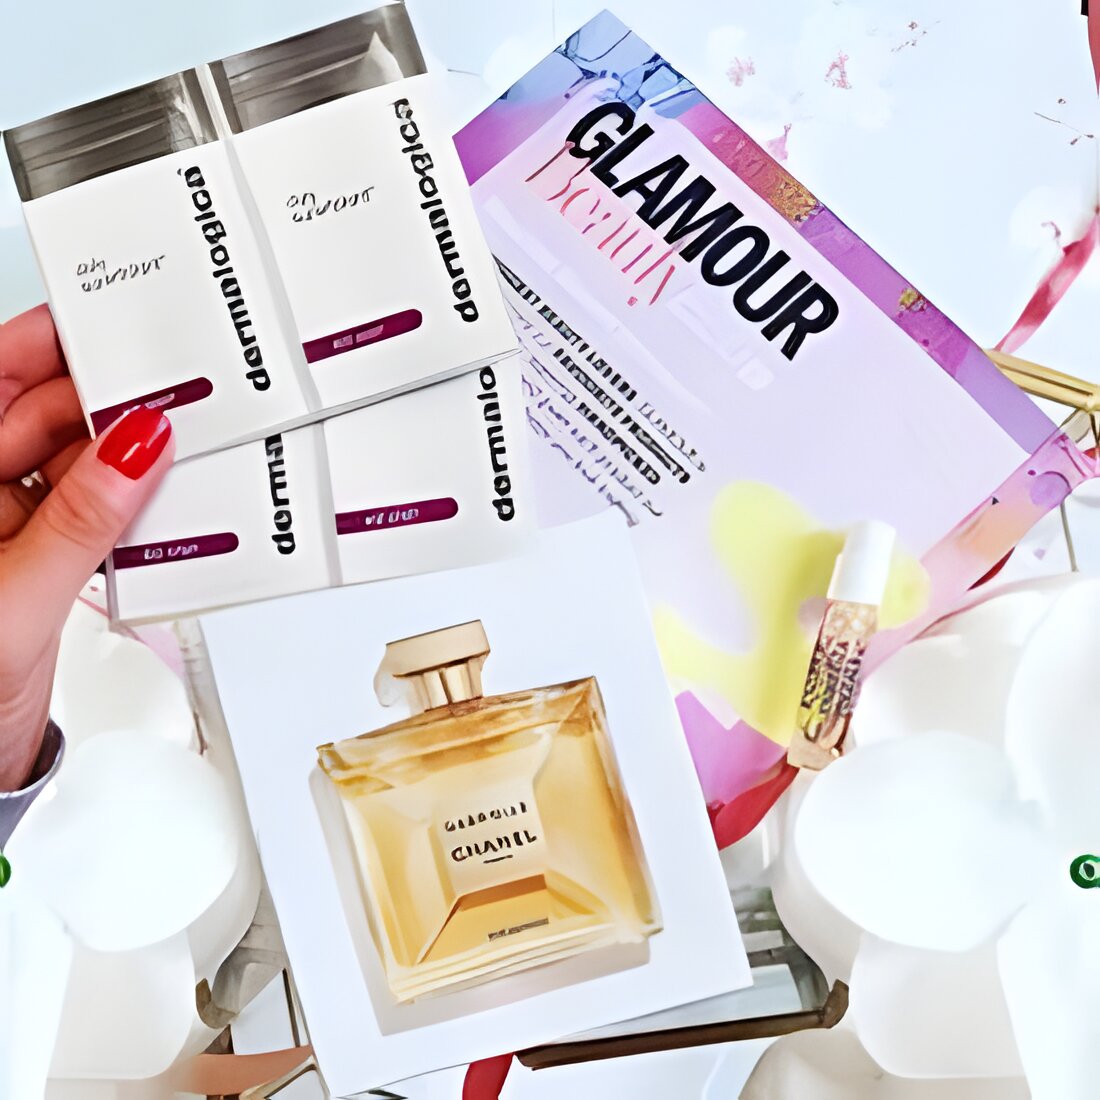 Free Beauty Samples From Glamour Beauty Club